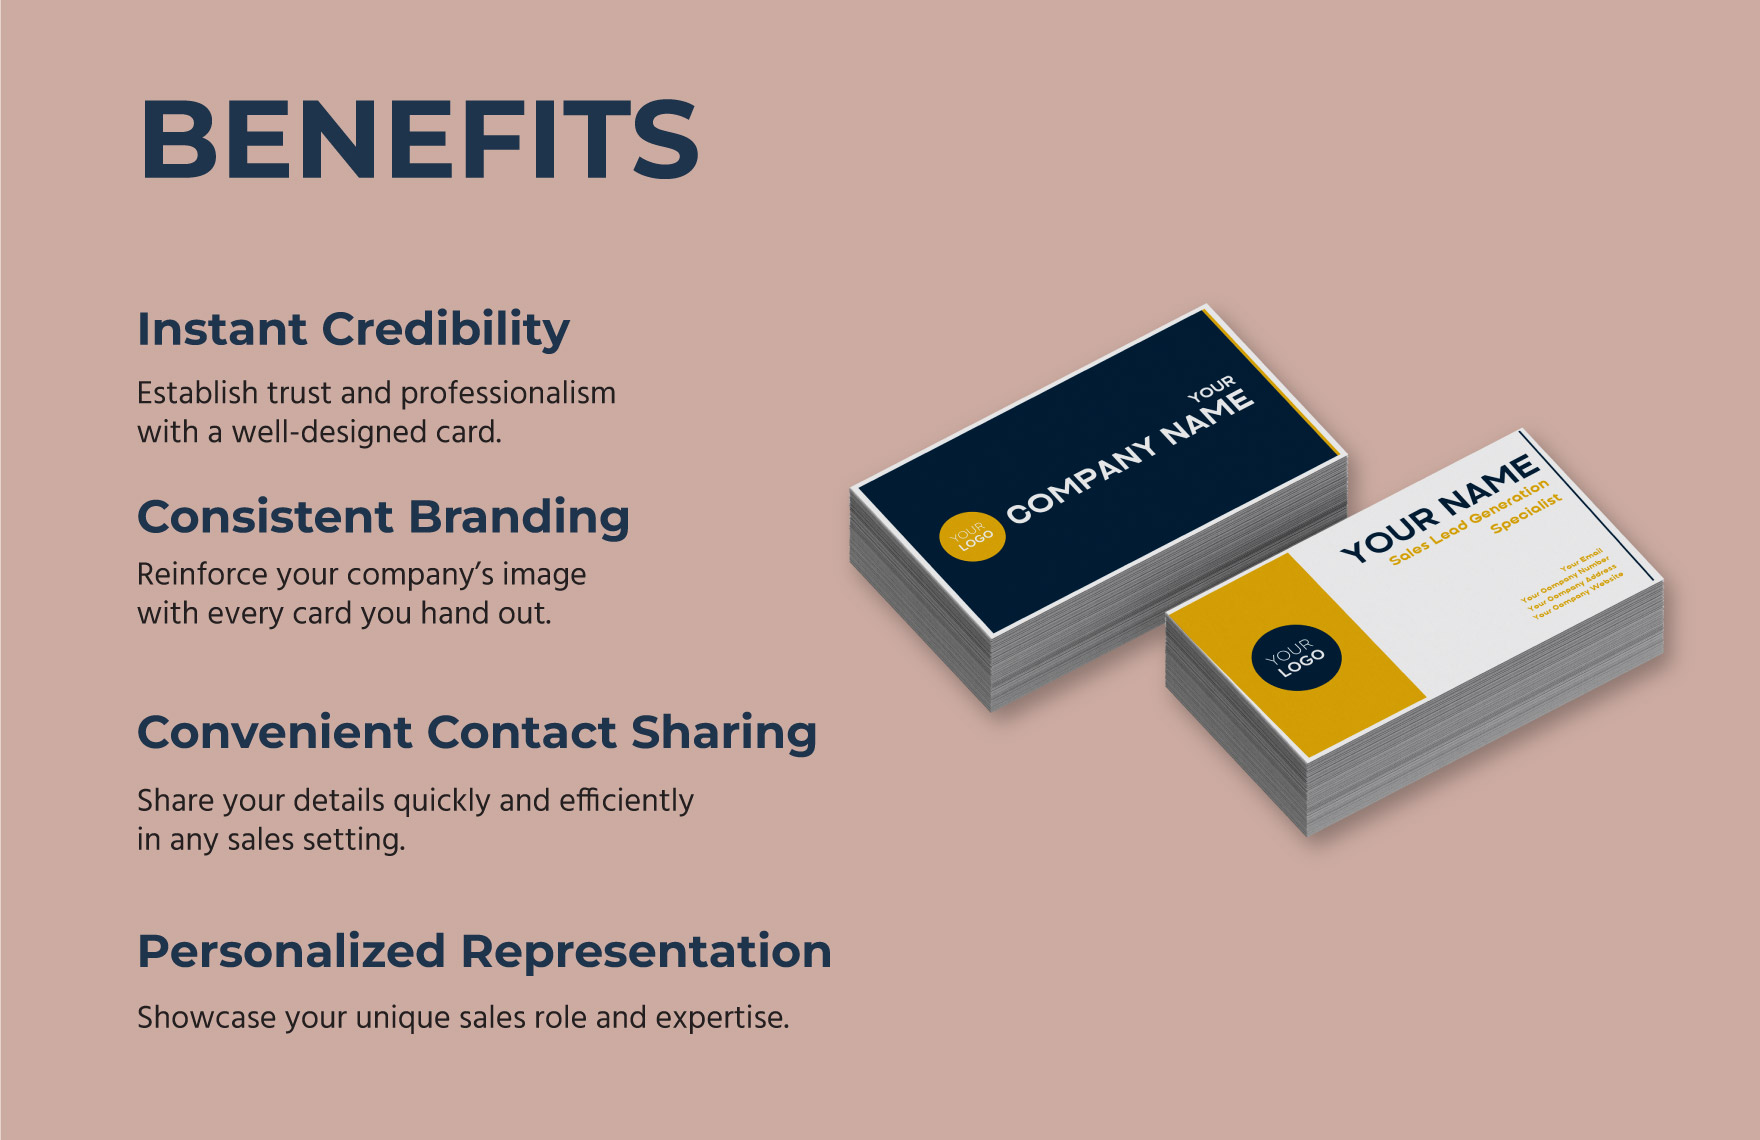 Sales Lead Generation Specialist Business Card Template